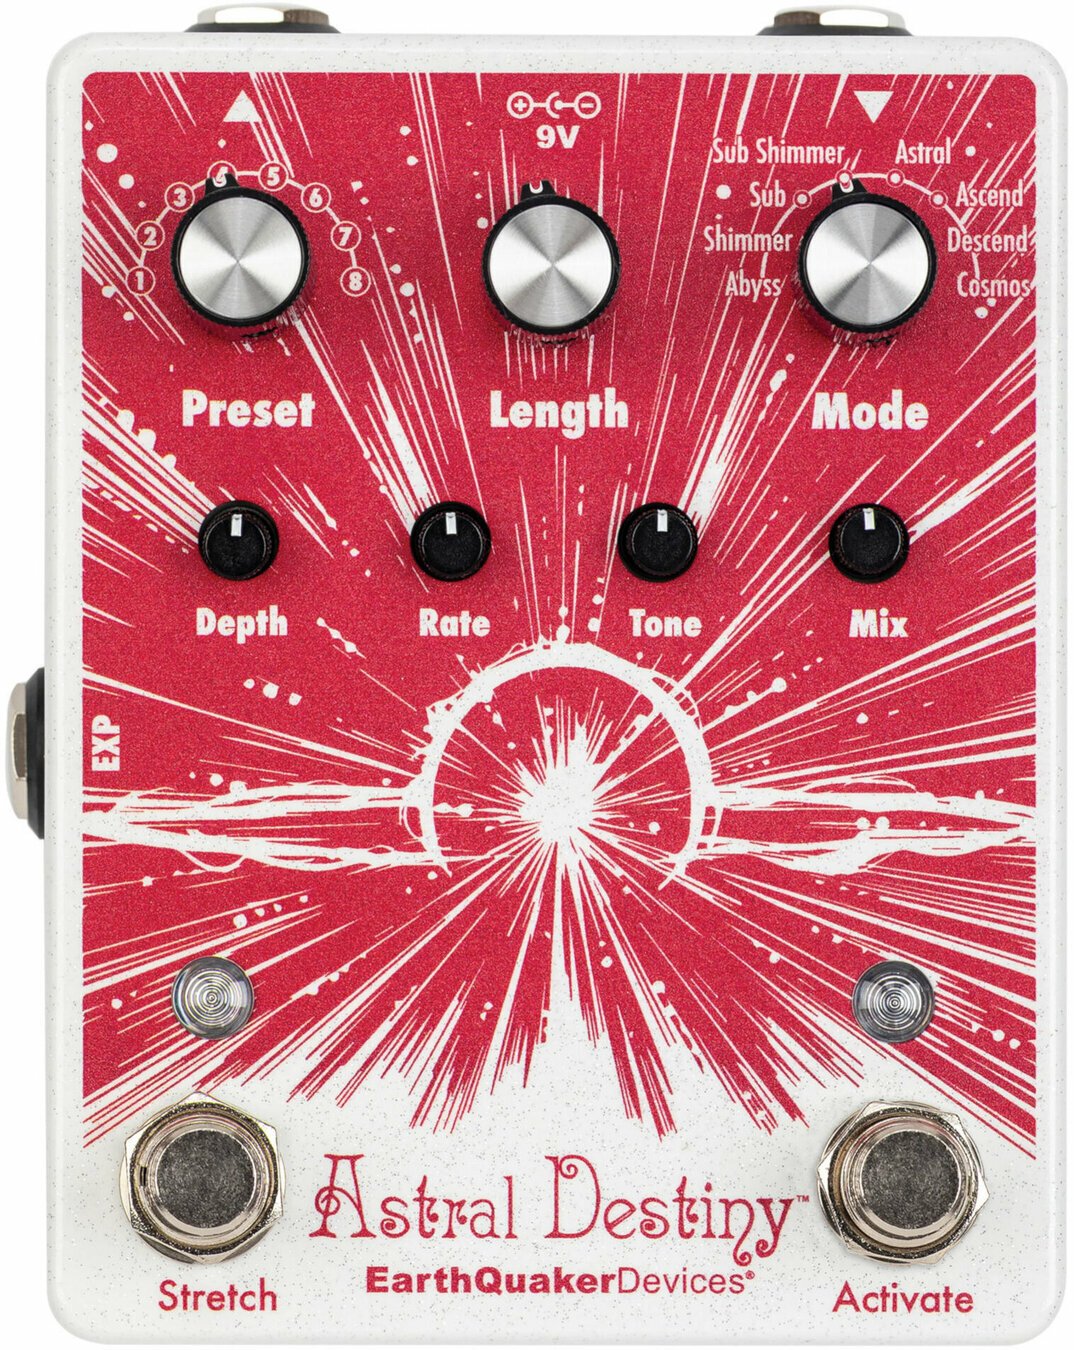 EarthQuaker Devices Astral Destiny EarthQuaker Devices